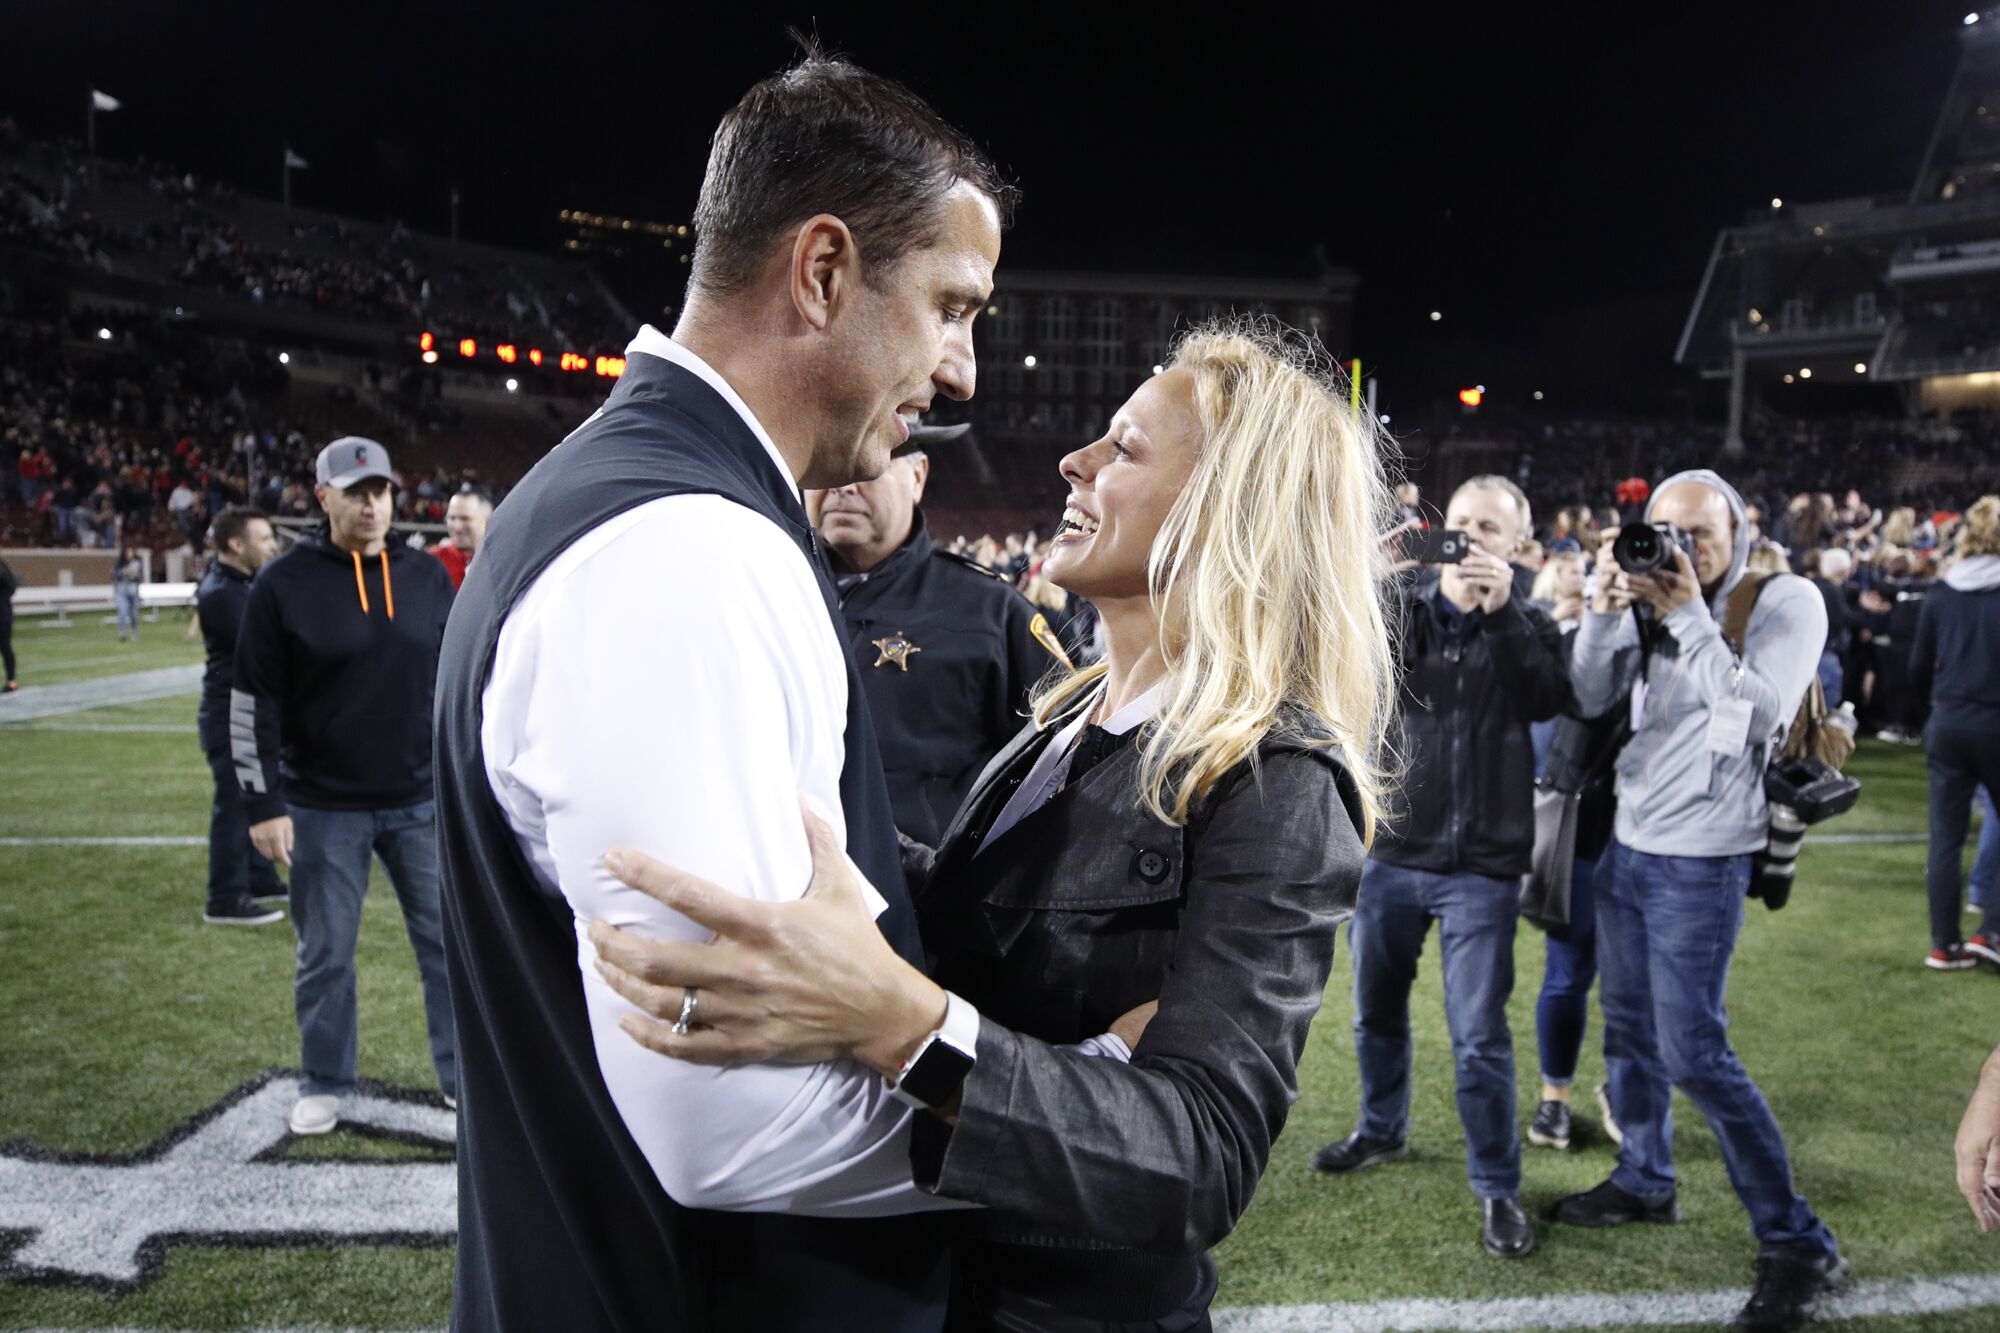 Cincinnati coach Luke Fickell celebrates with his wife, Amy, after the game beating UCF at Nippert Stadium 